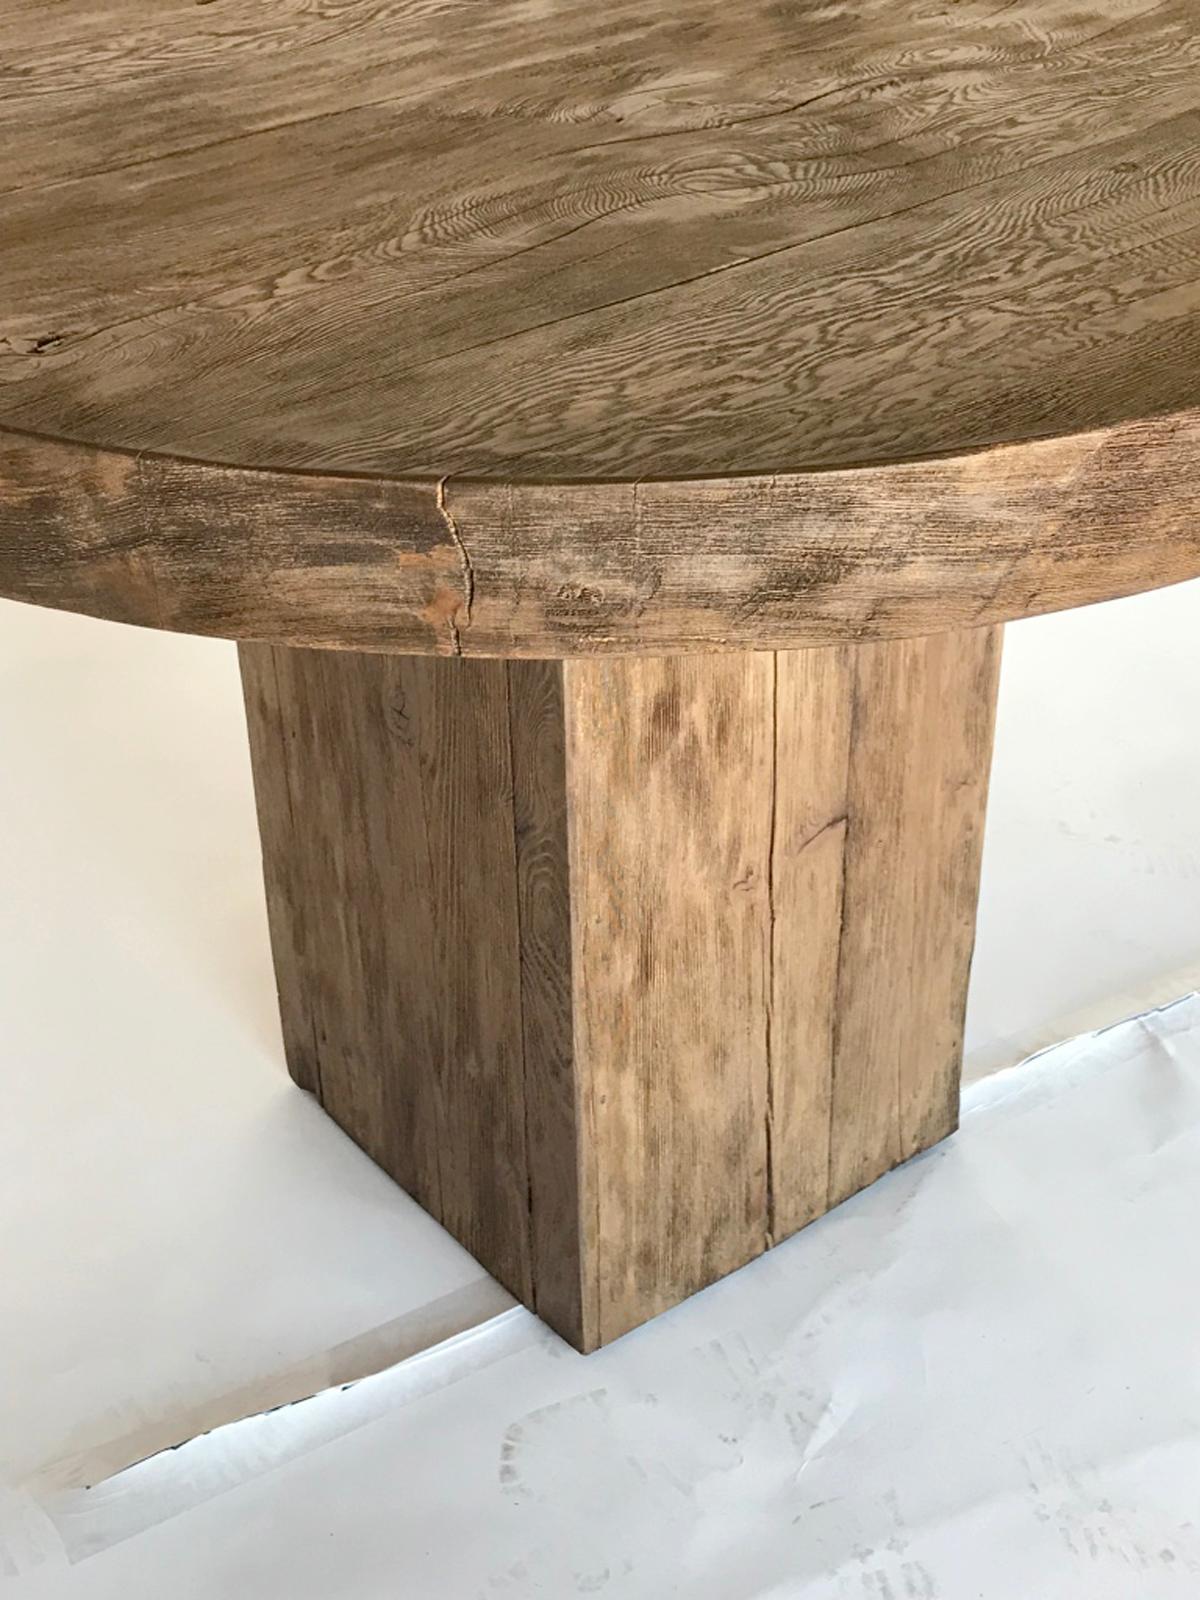 Custom rustic modern, with simple lines, center table, game table or small dining table. As shown, it fits four chairs comfortably. Made in Douglas fir and finished in a durable dark latte, range of color. Can be made in various sizes and finishes.